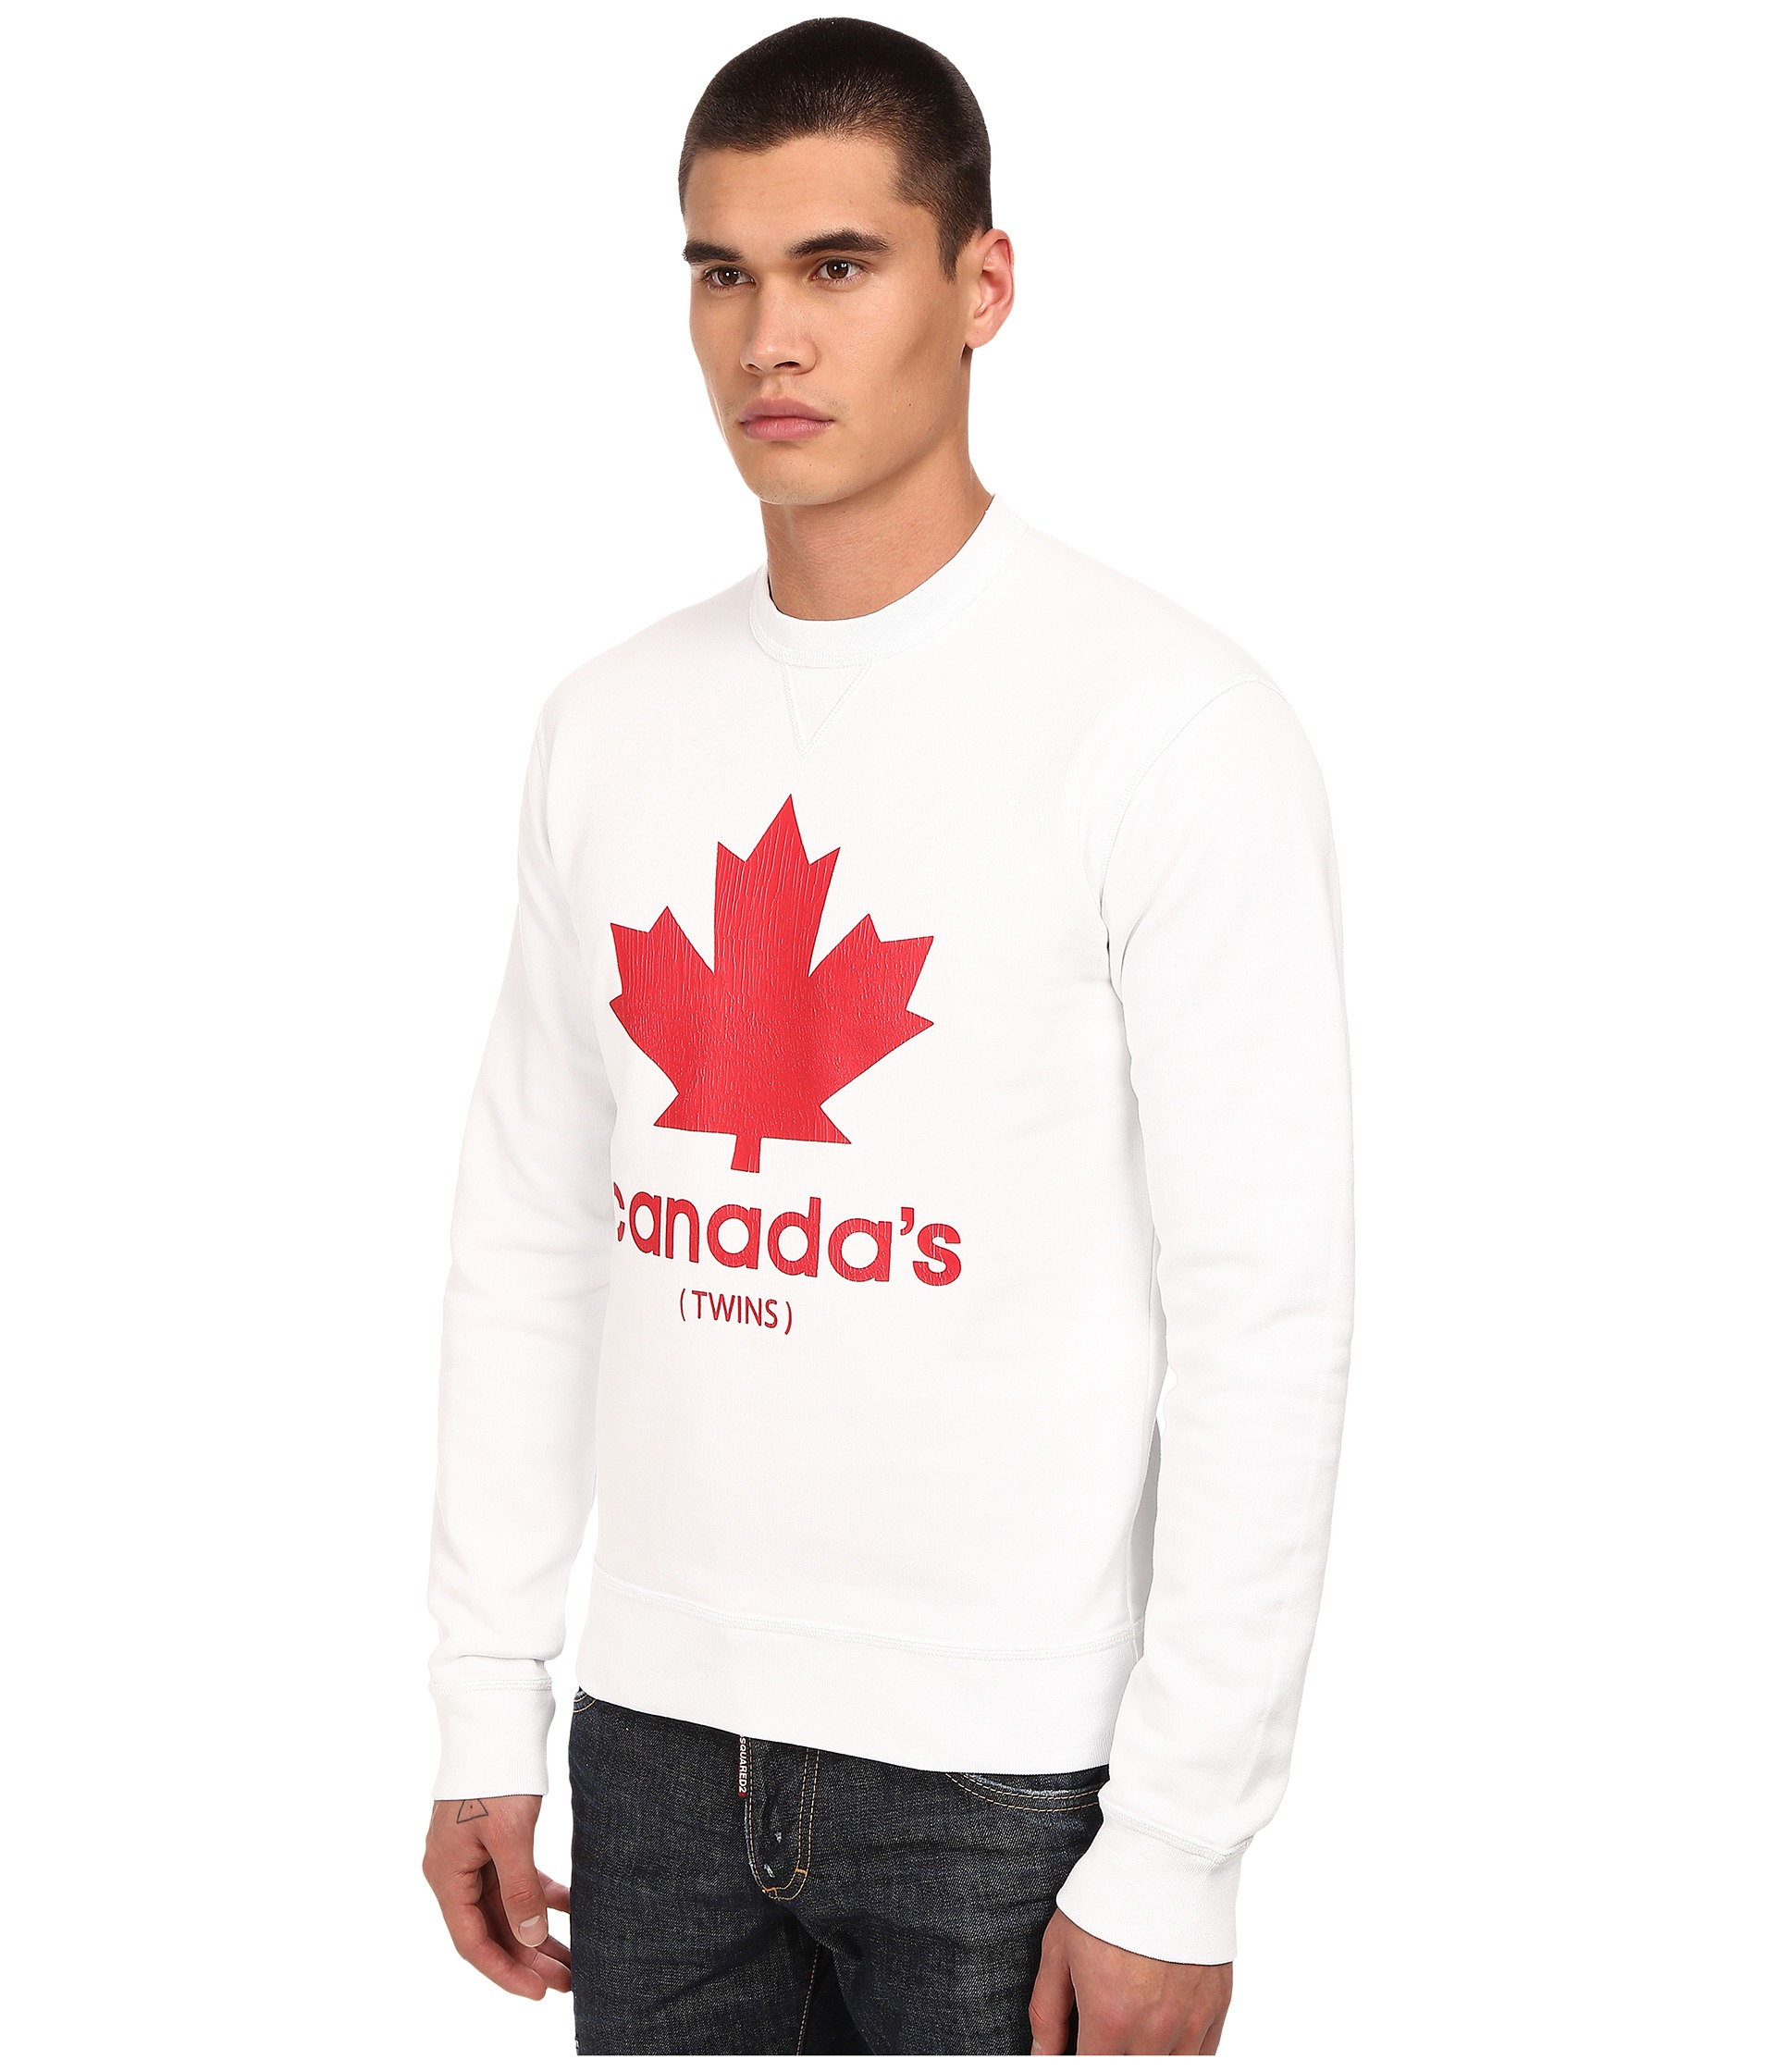 DSquared² Canada's Twins Sweatshirt in White for Men - Lyst